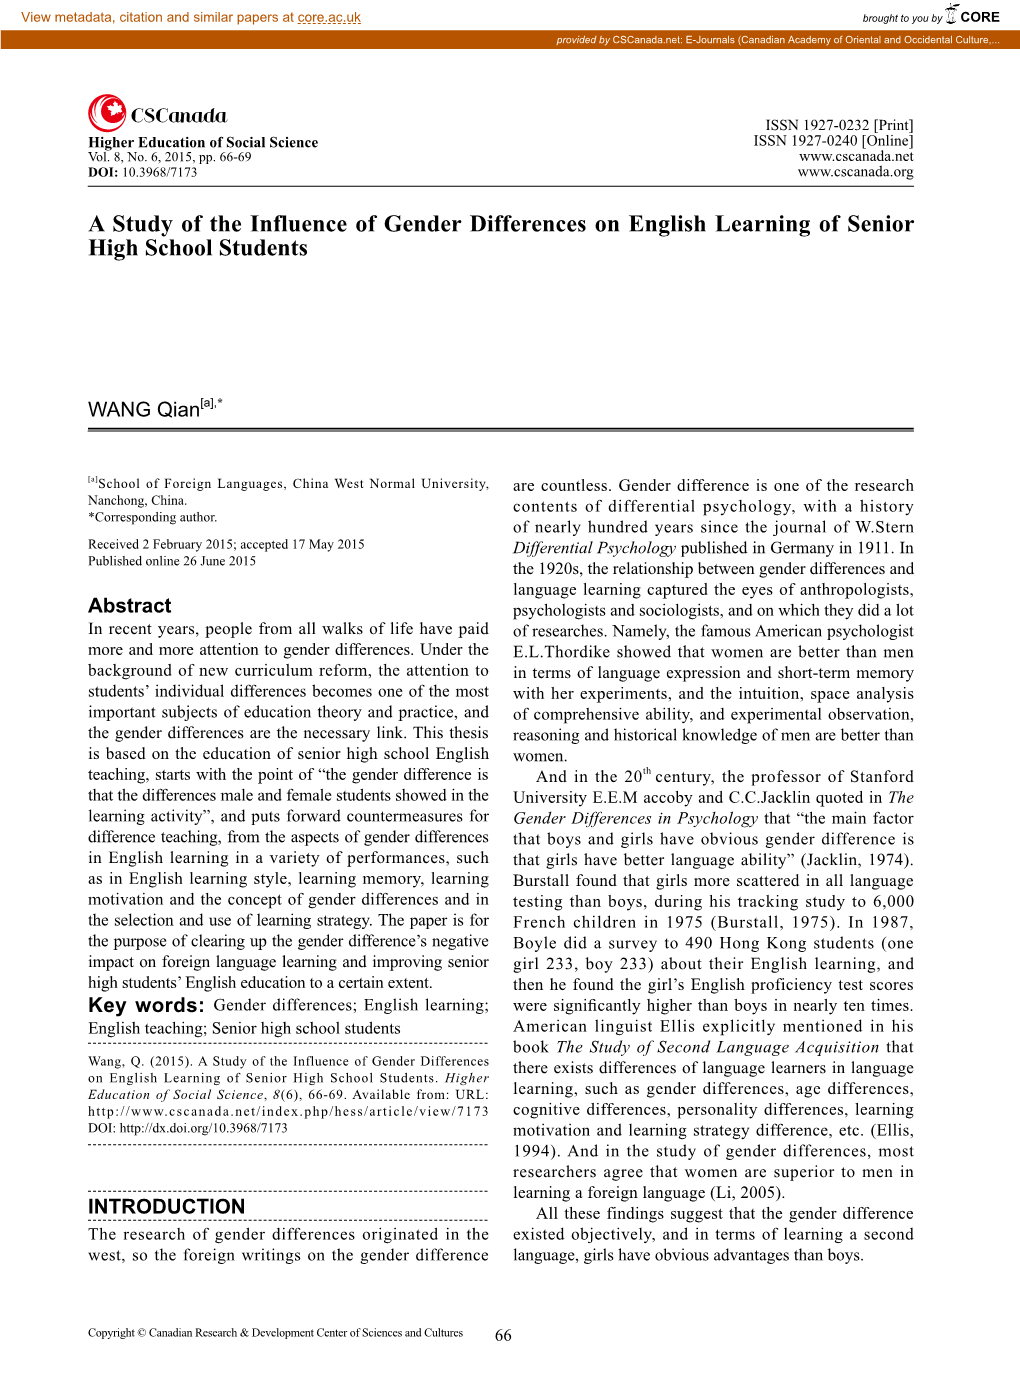 A Study of the Influence of Gender Differences on English Learning of Senior High School Students